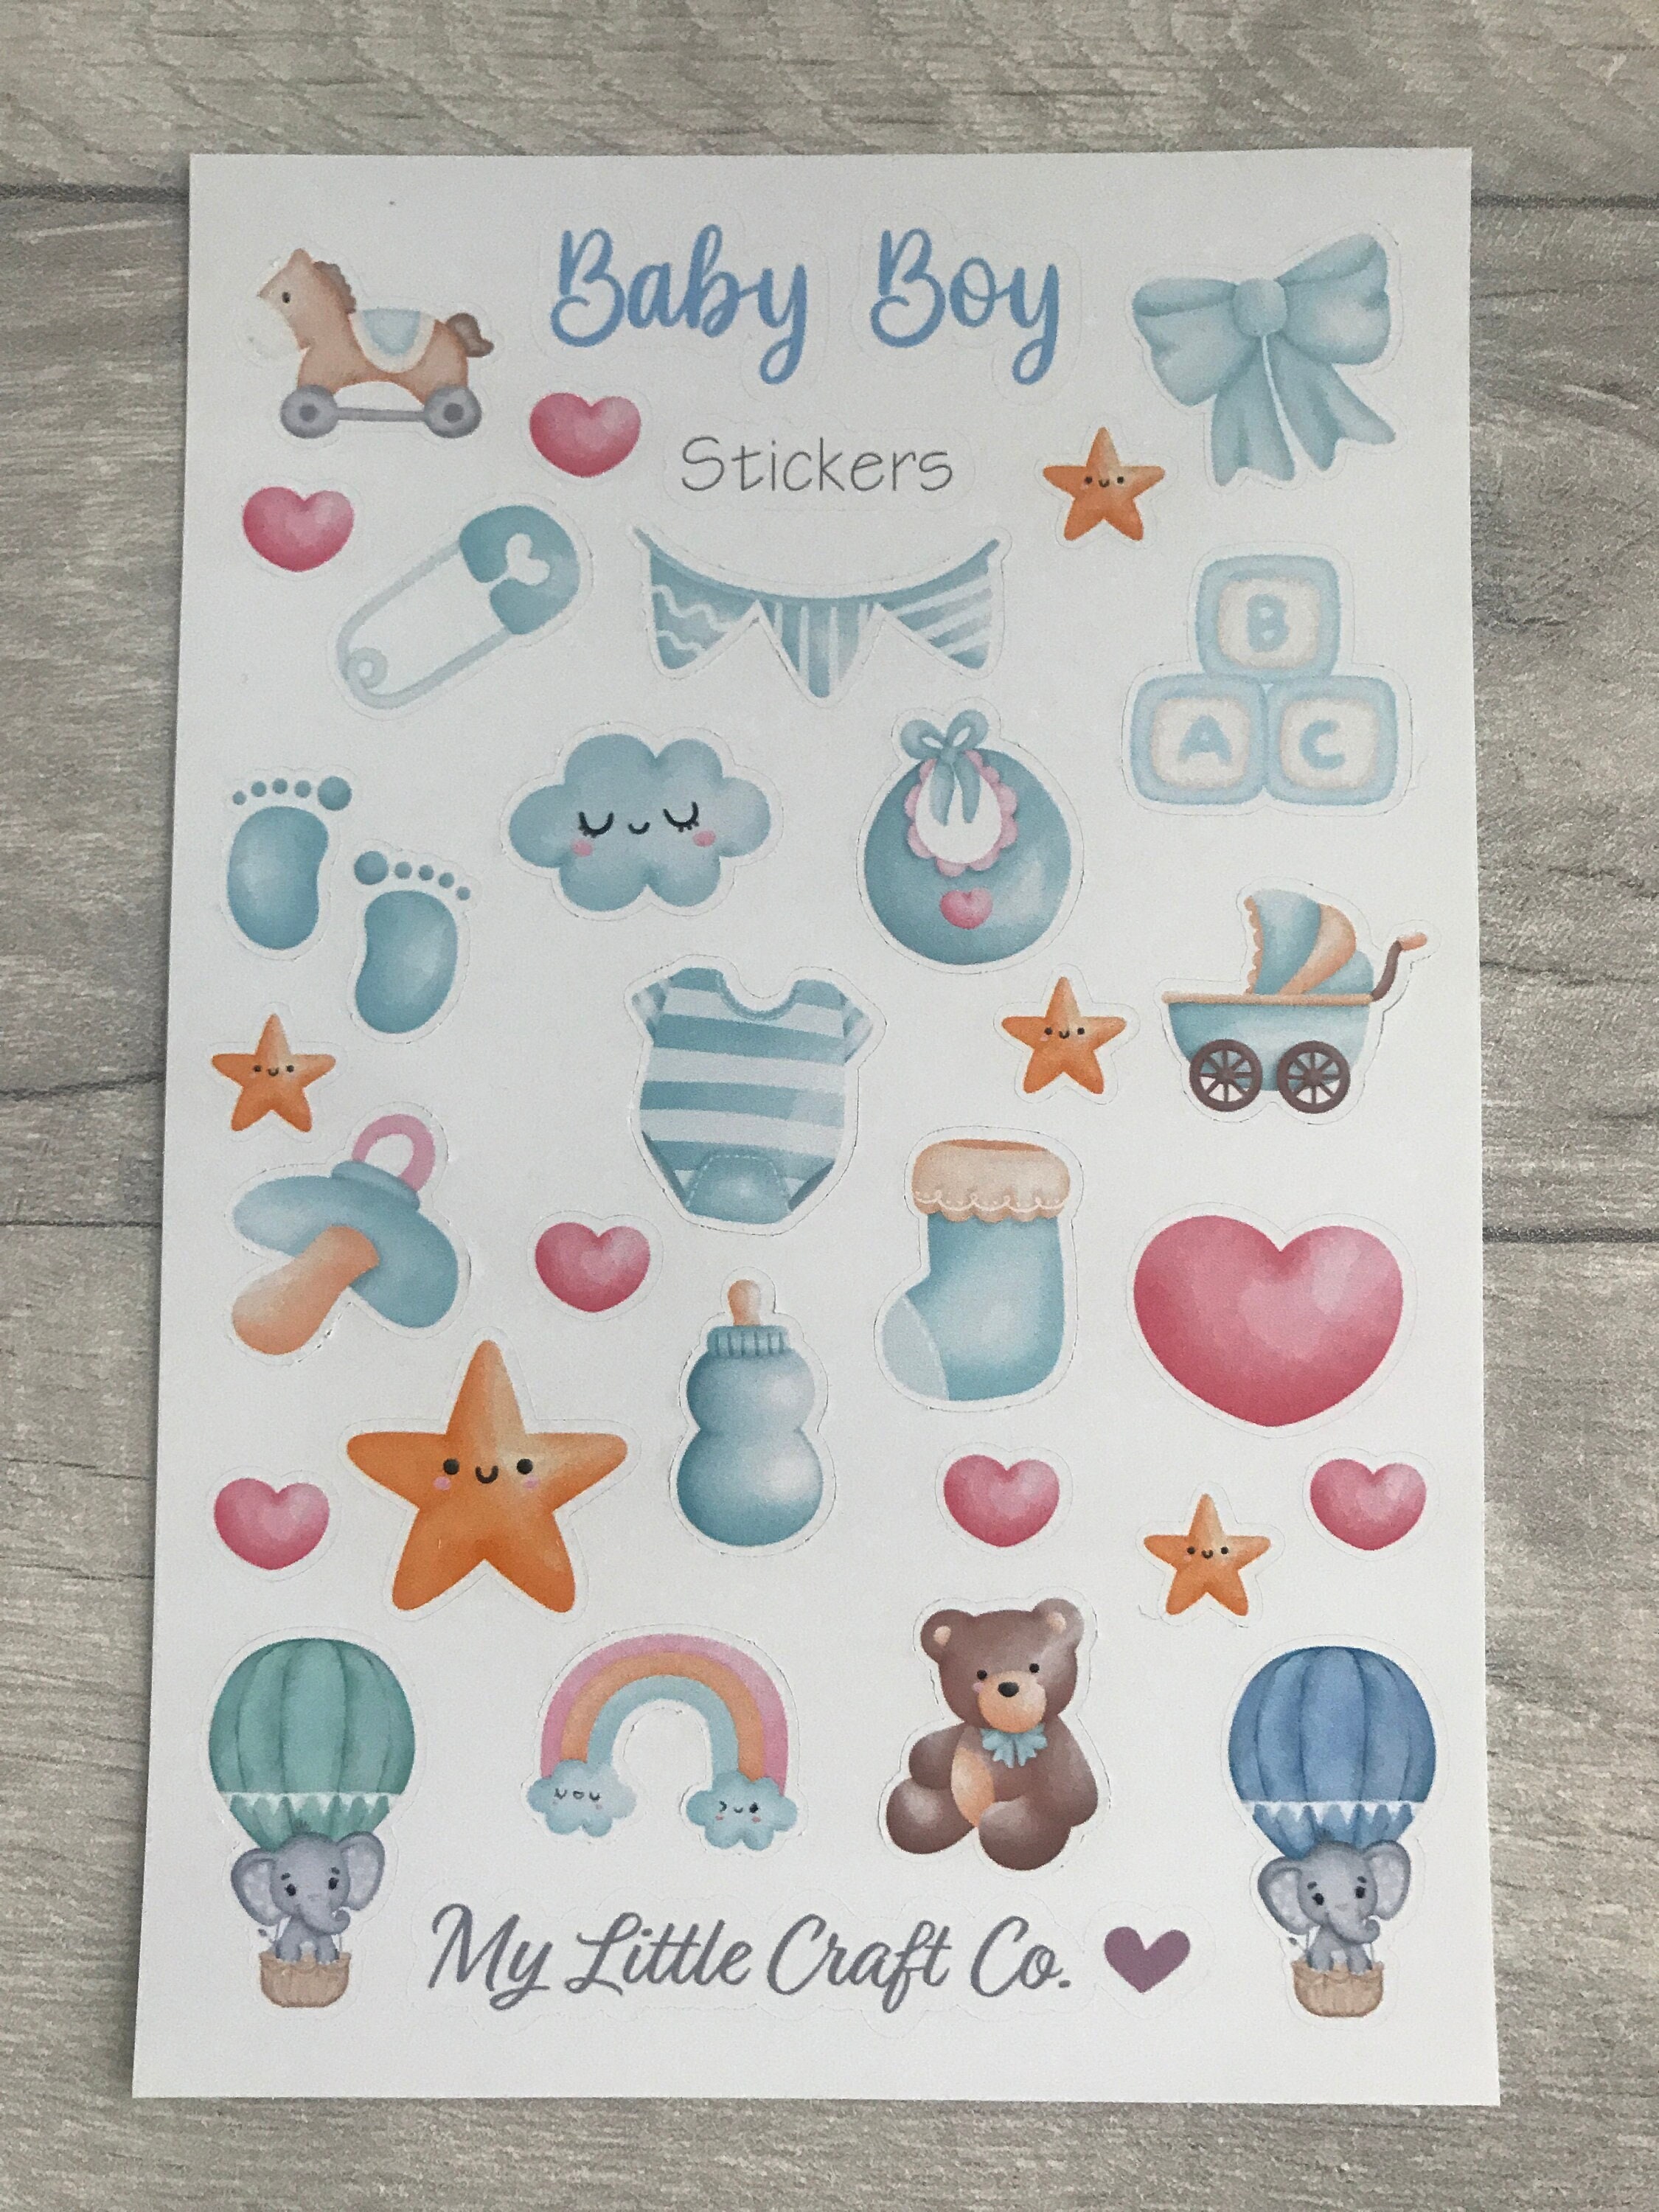 4Sheets/78pcs Baby Scrapbook Stickers for Photo Albums Envelopes  Scrapbooking Party Favors